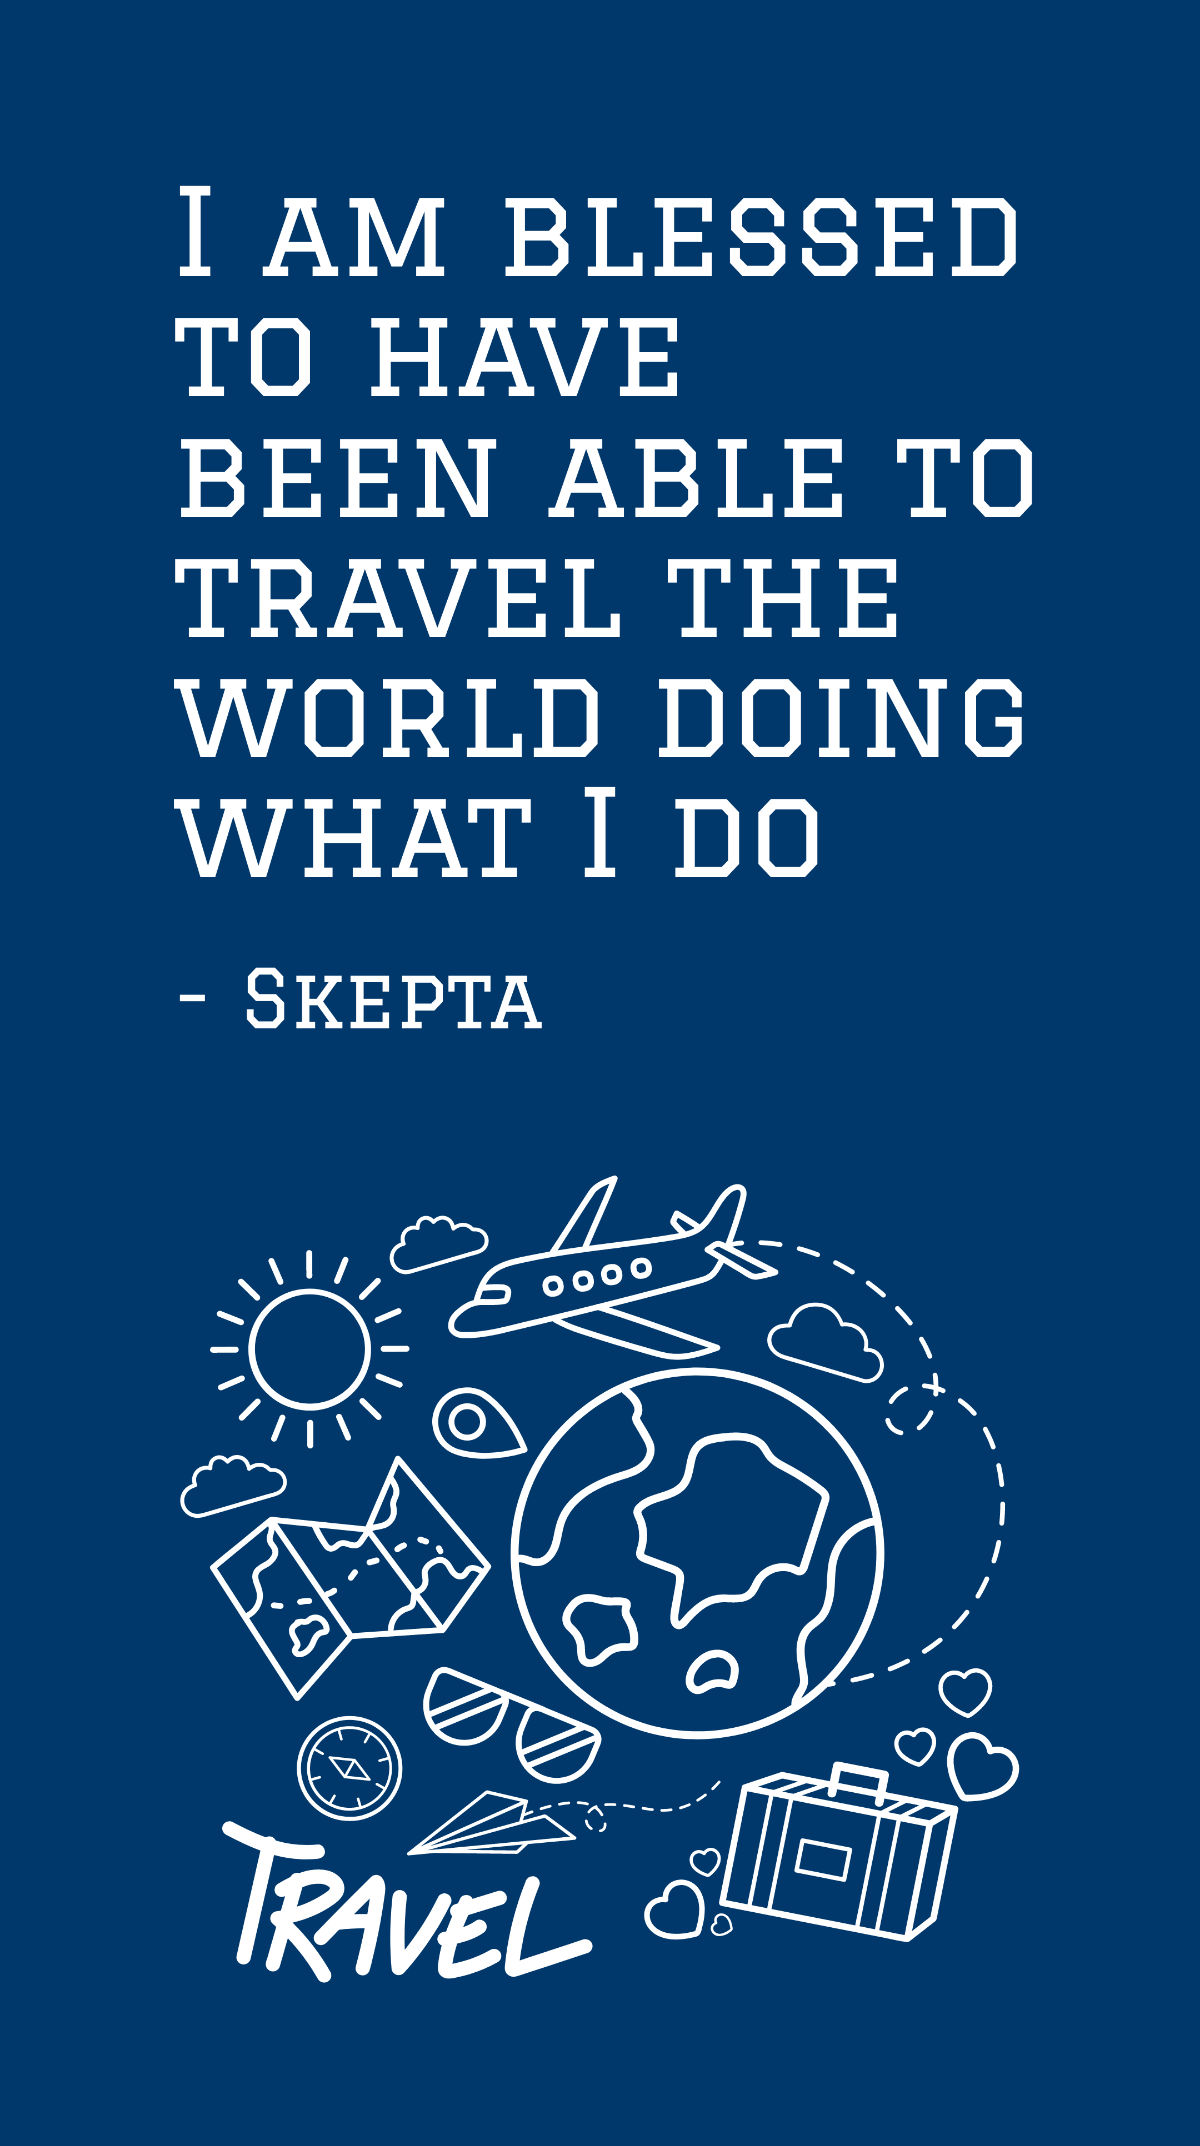 Skepta - I am blessed to have been able to travel the world doing what I do